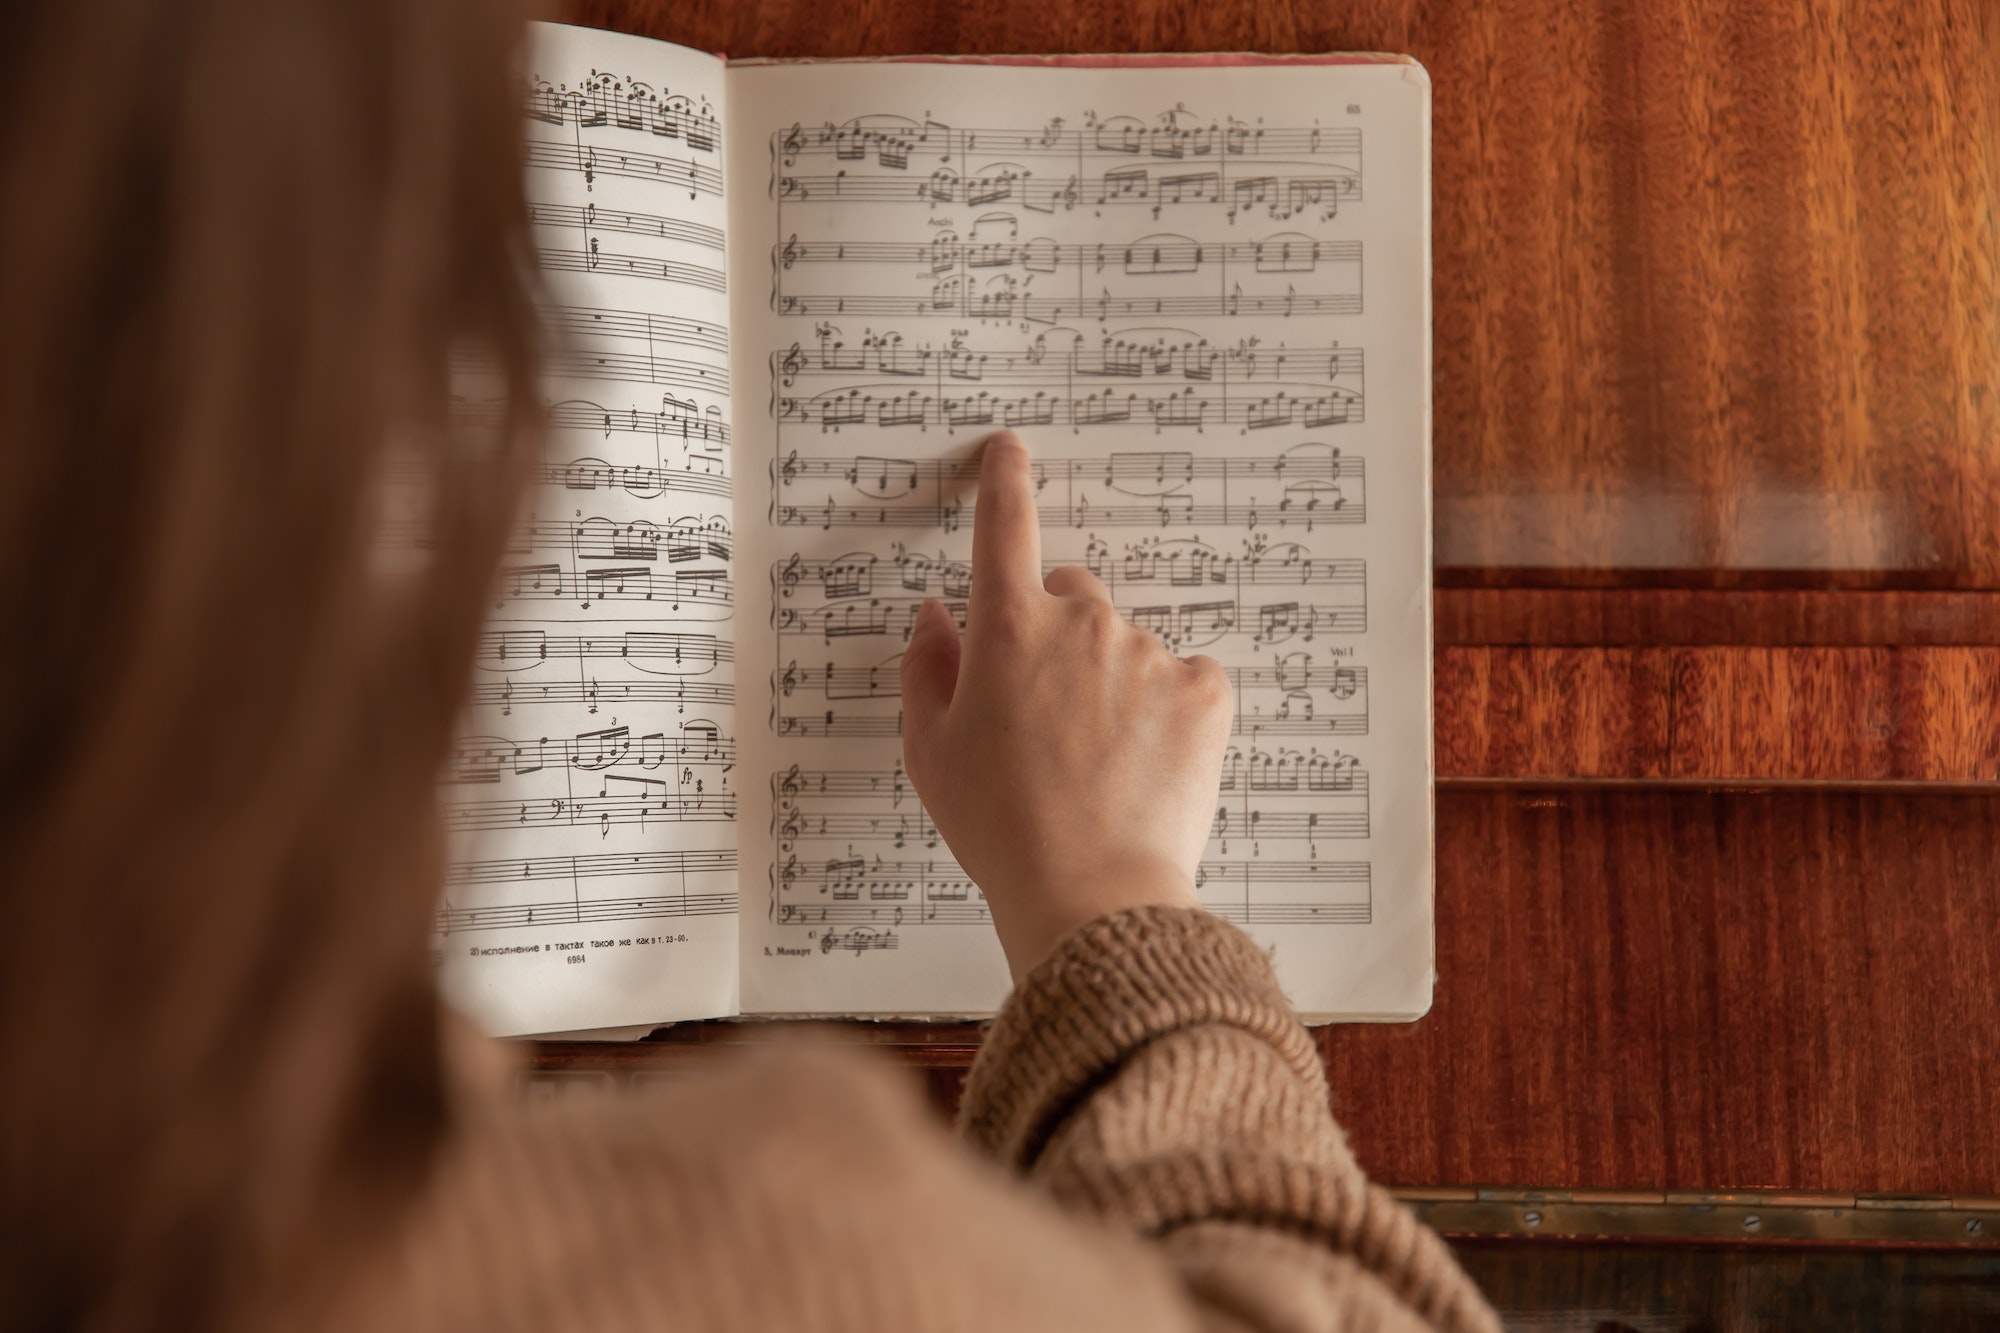 A woman shows her finger to the notes, the process of studying music.